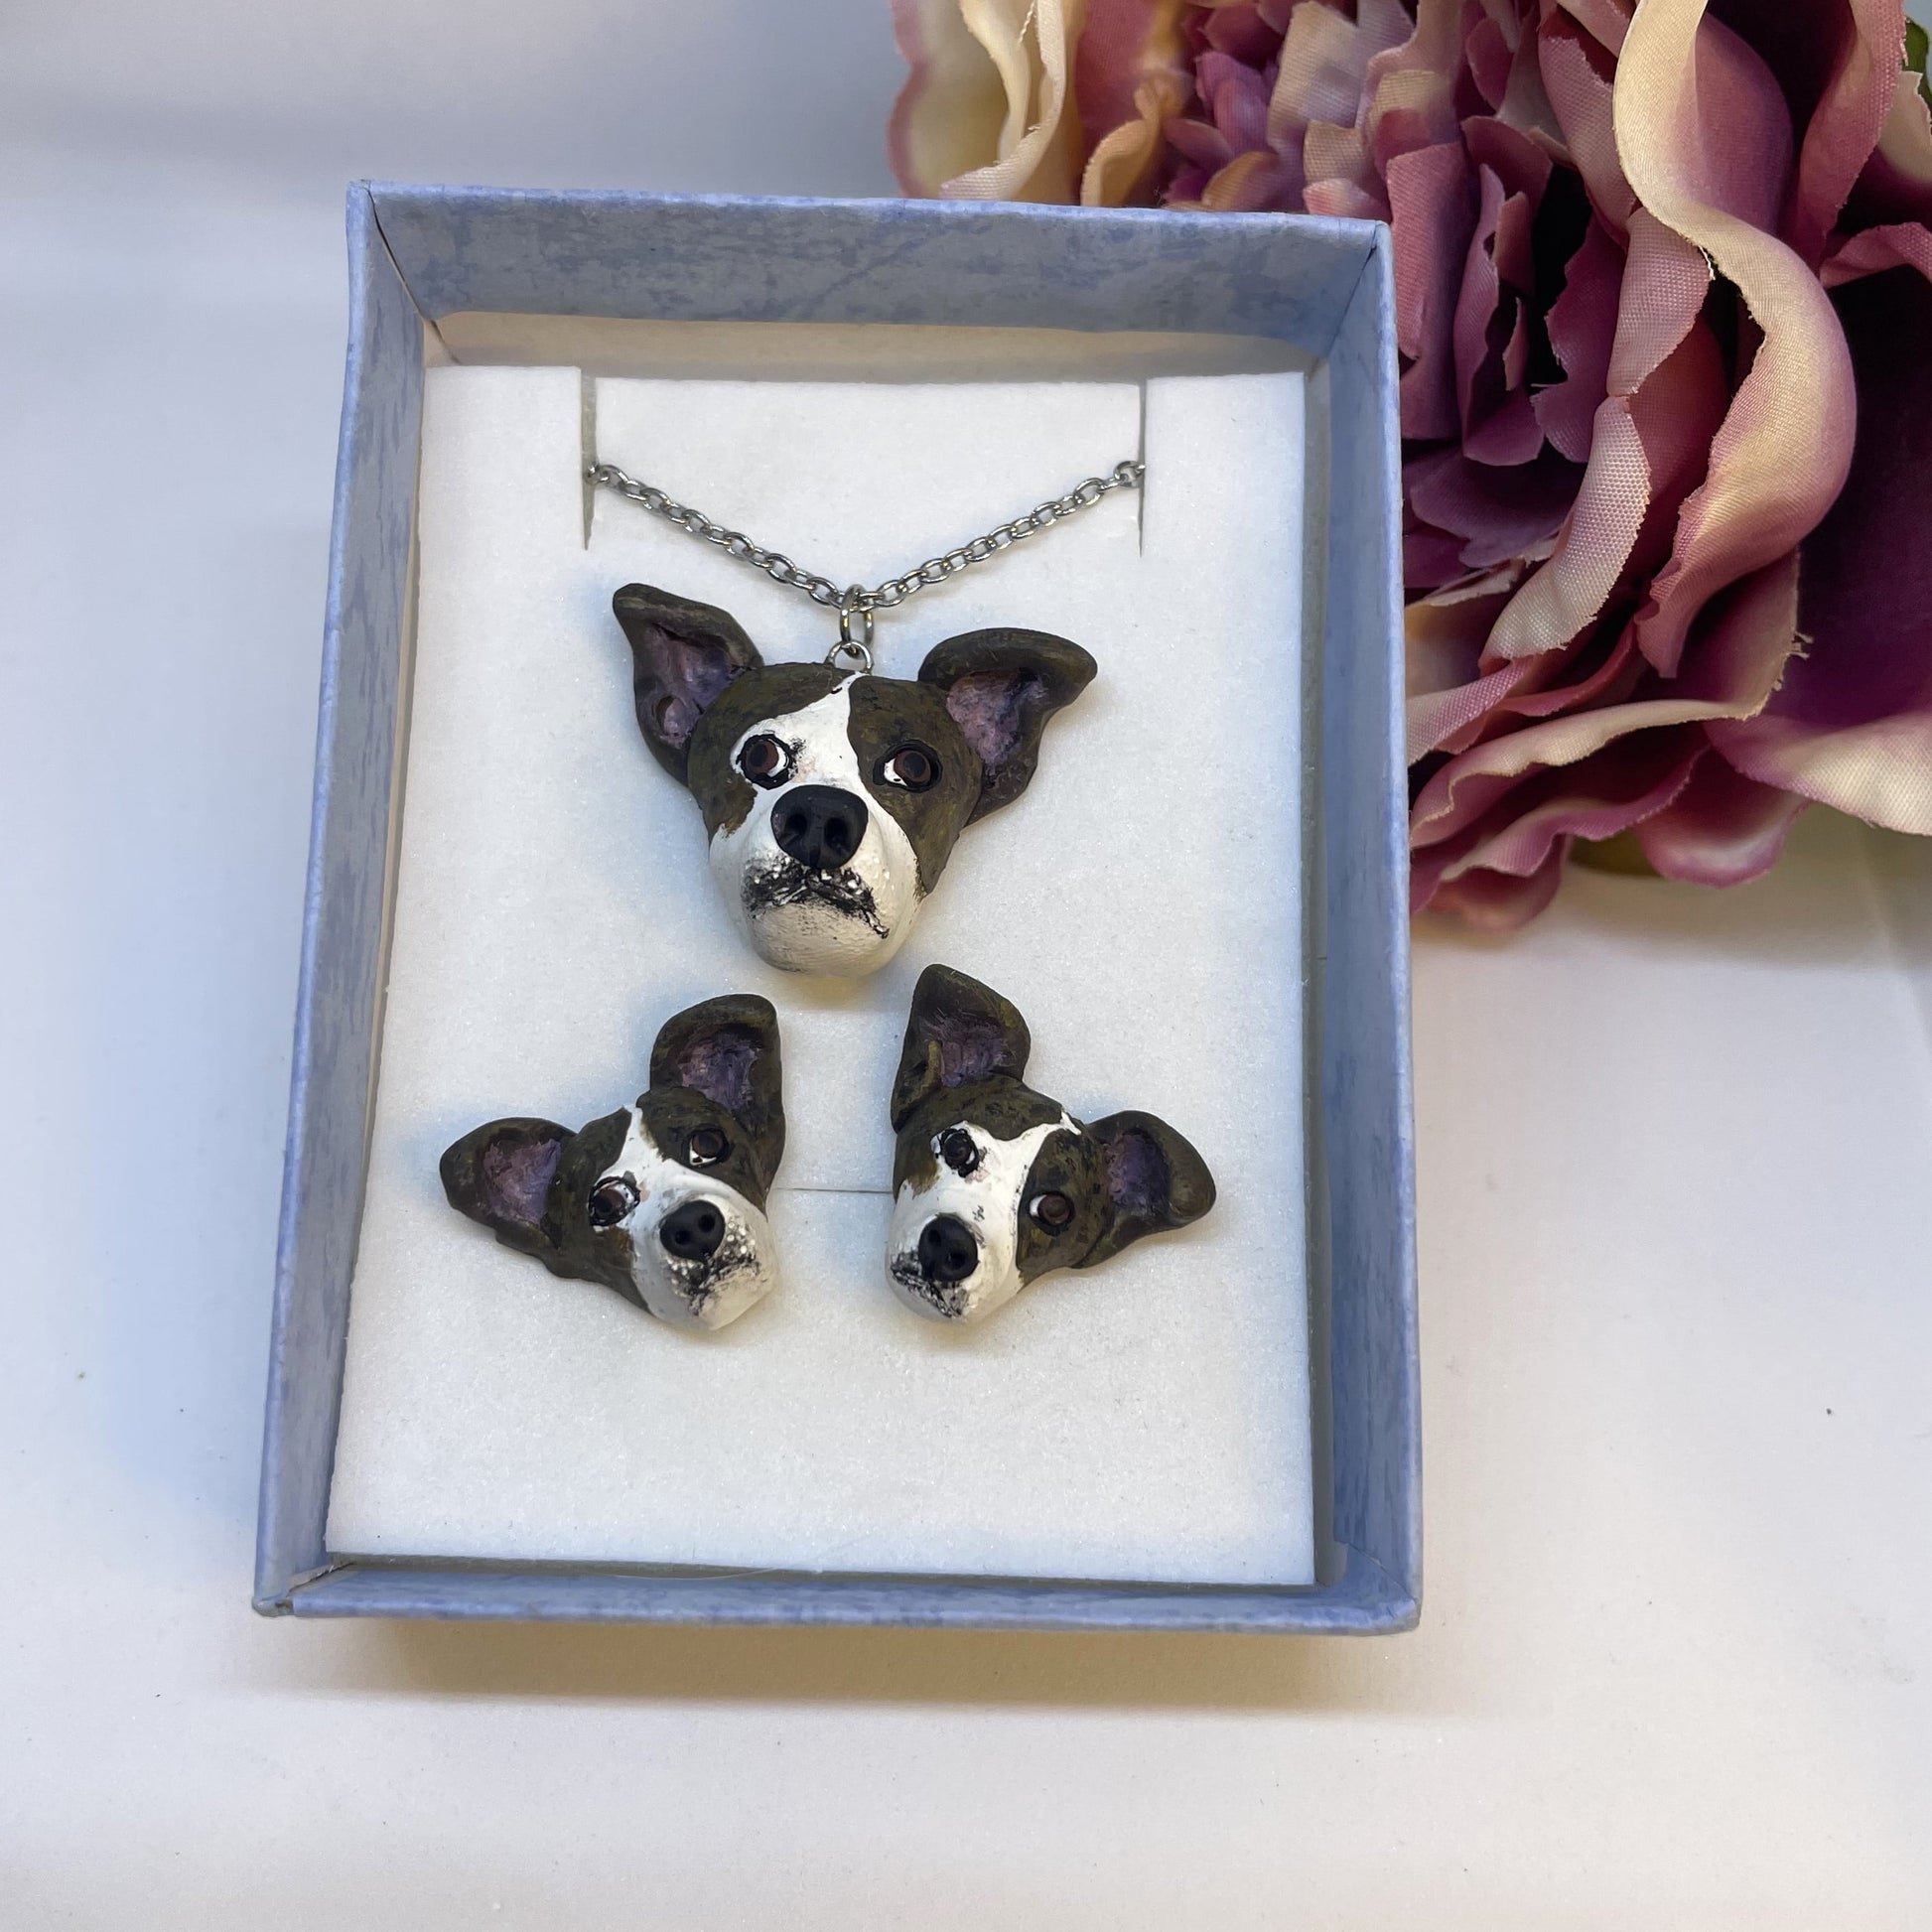 Handmade custom dog necklace pendant on chain plus matching stud earrings, in blue display box in front of faux pink flower.